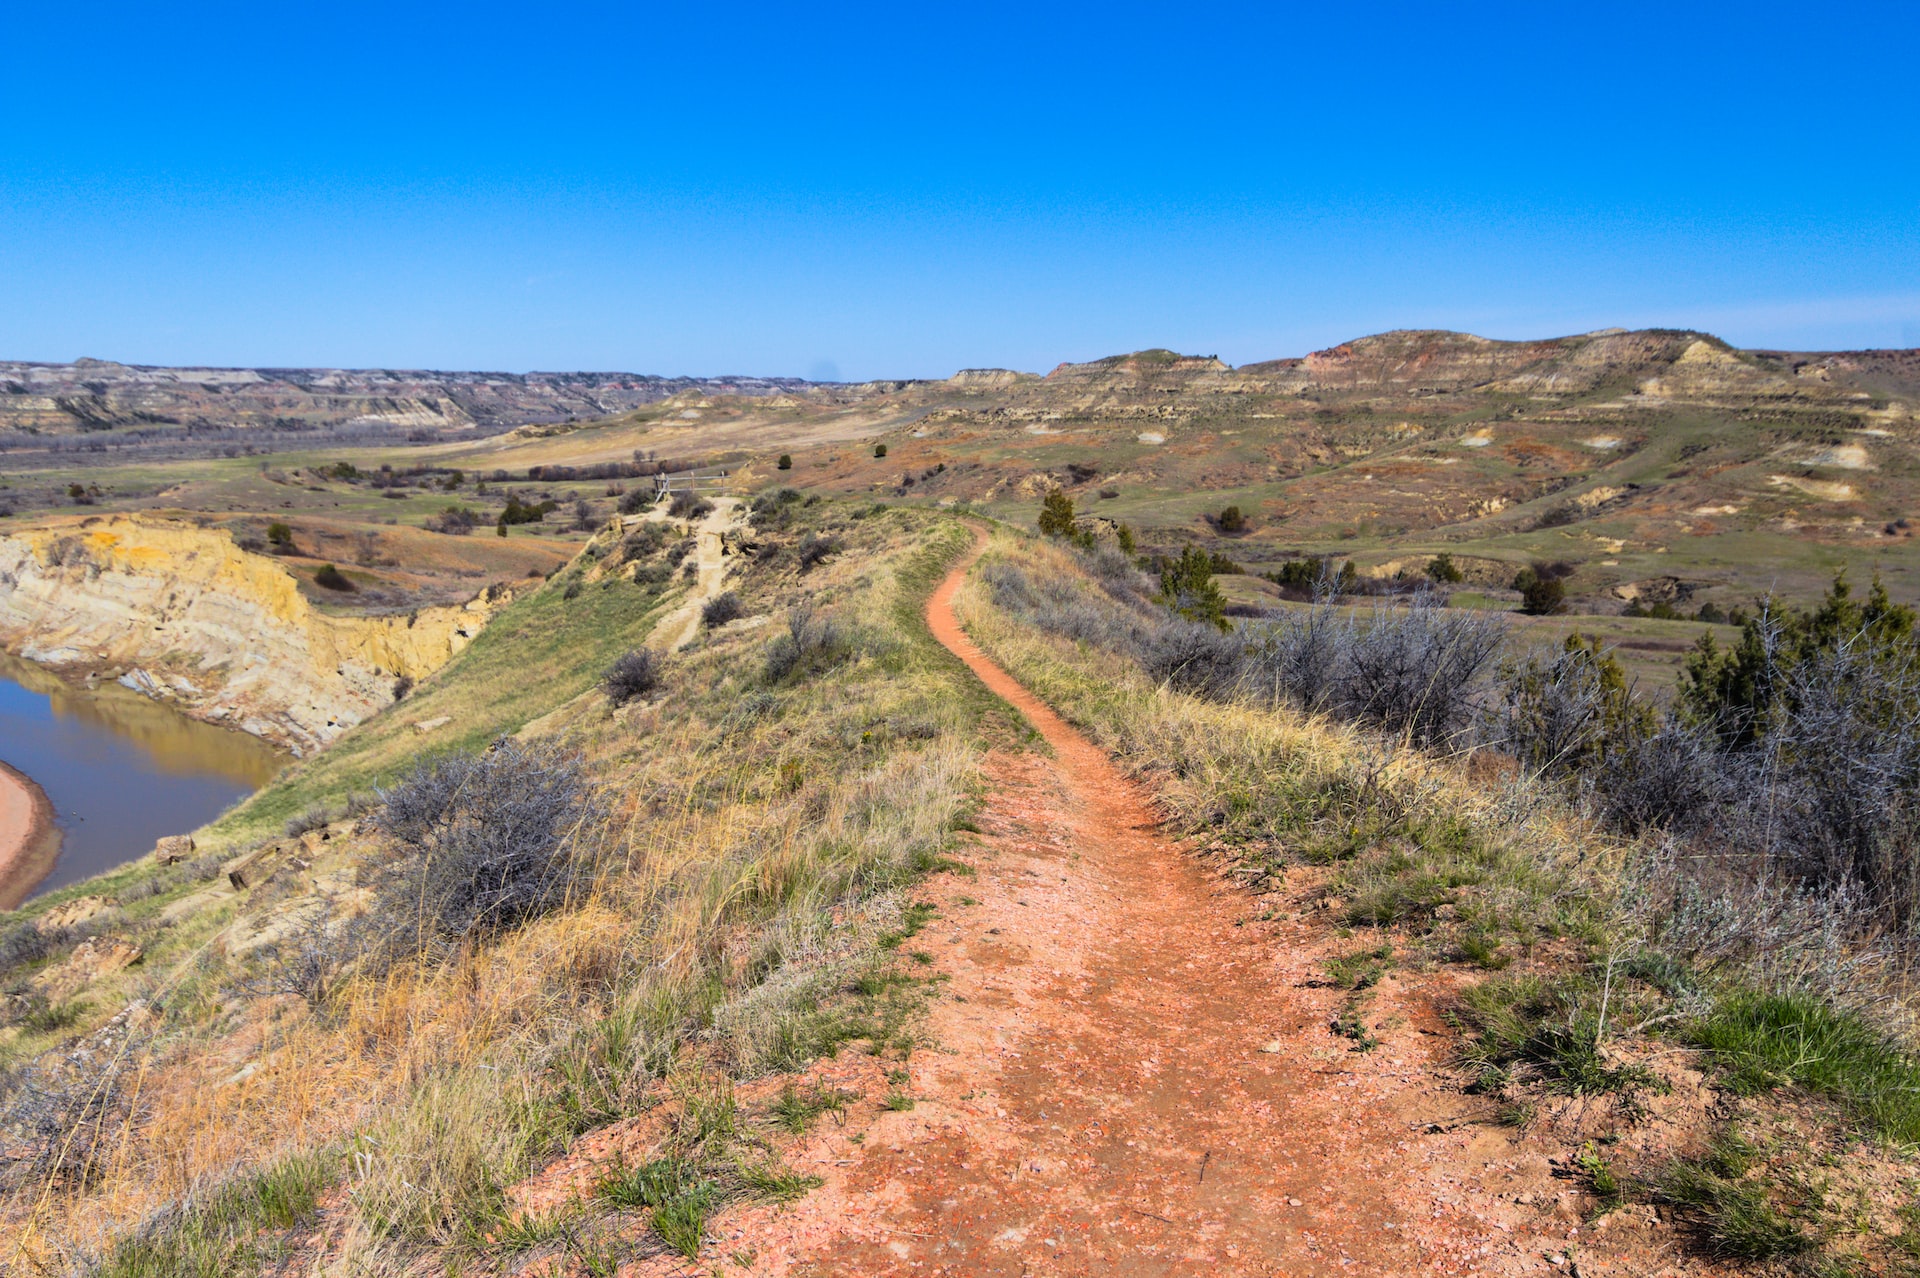 A dry meadow with yellowish-green grass on both sides of a narrow dirt trail